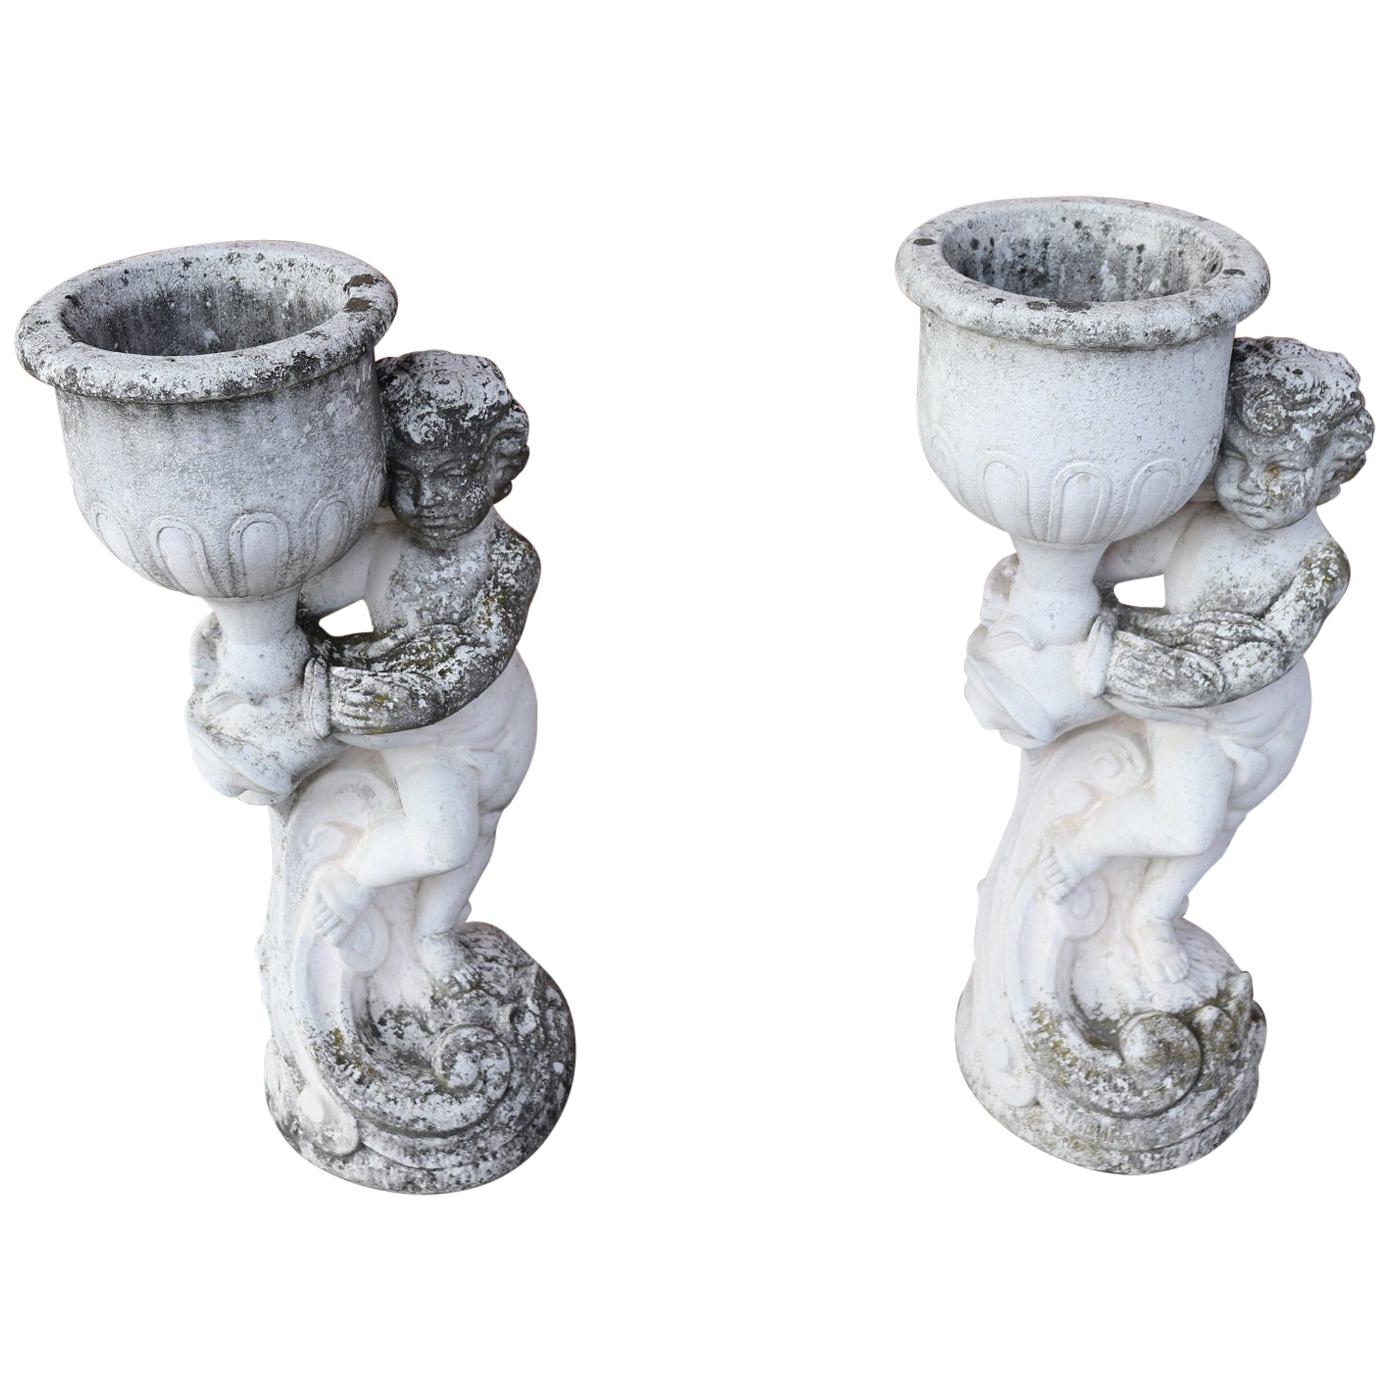 20th Century Italian Neoclassical Stone Garden Statue with Vase, Set of 2 For Sale